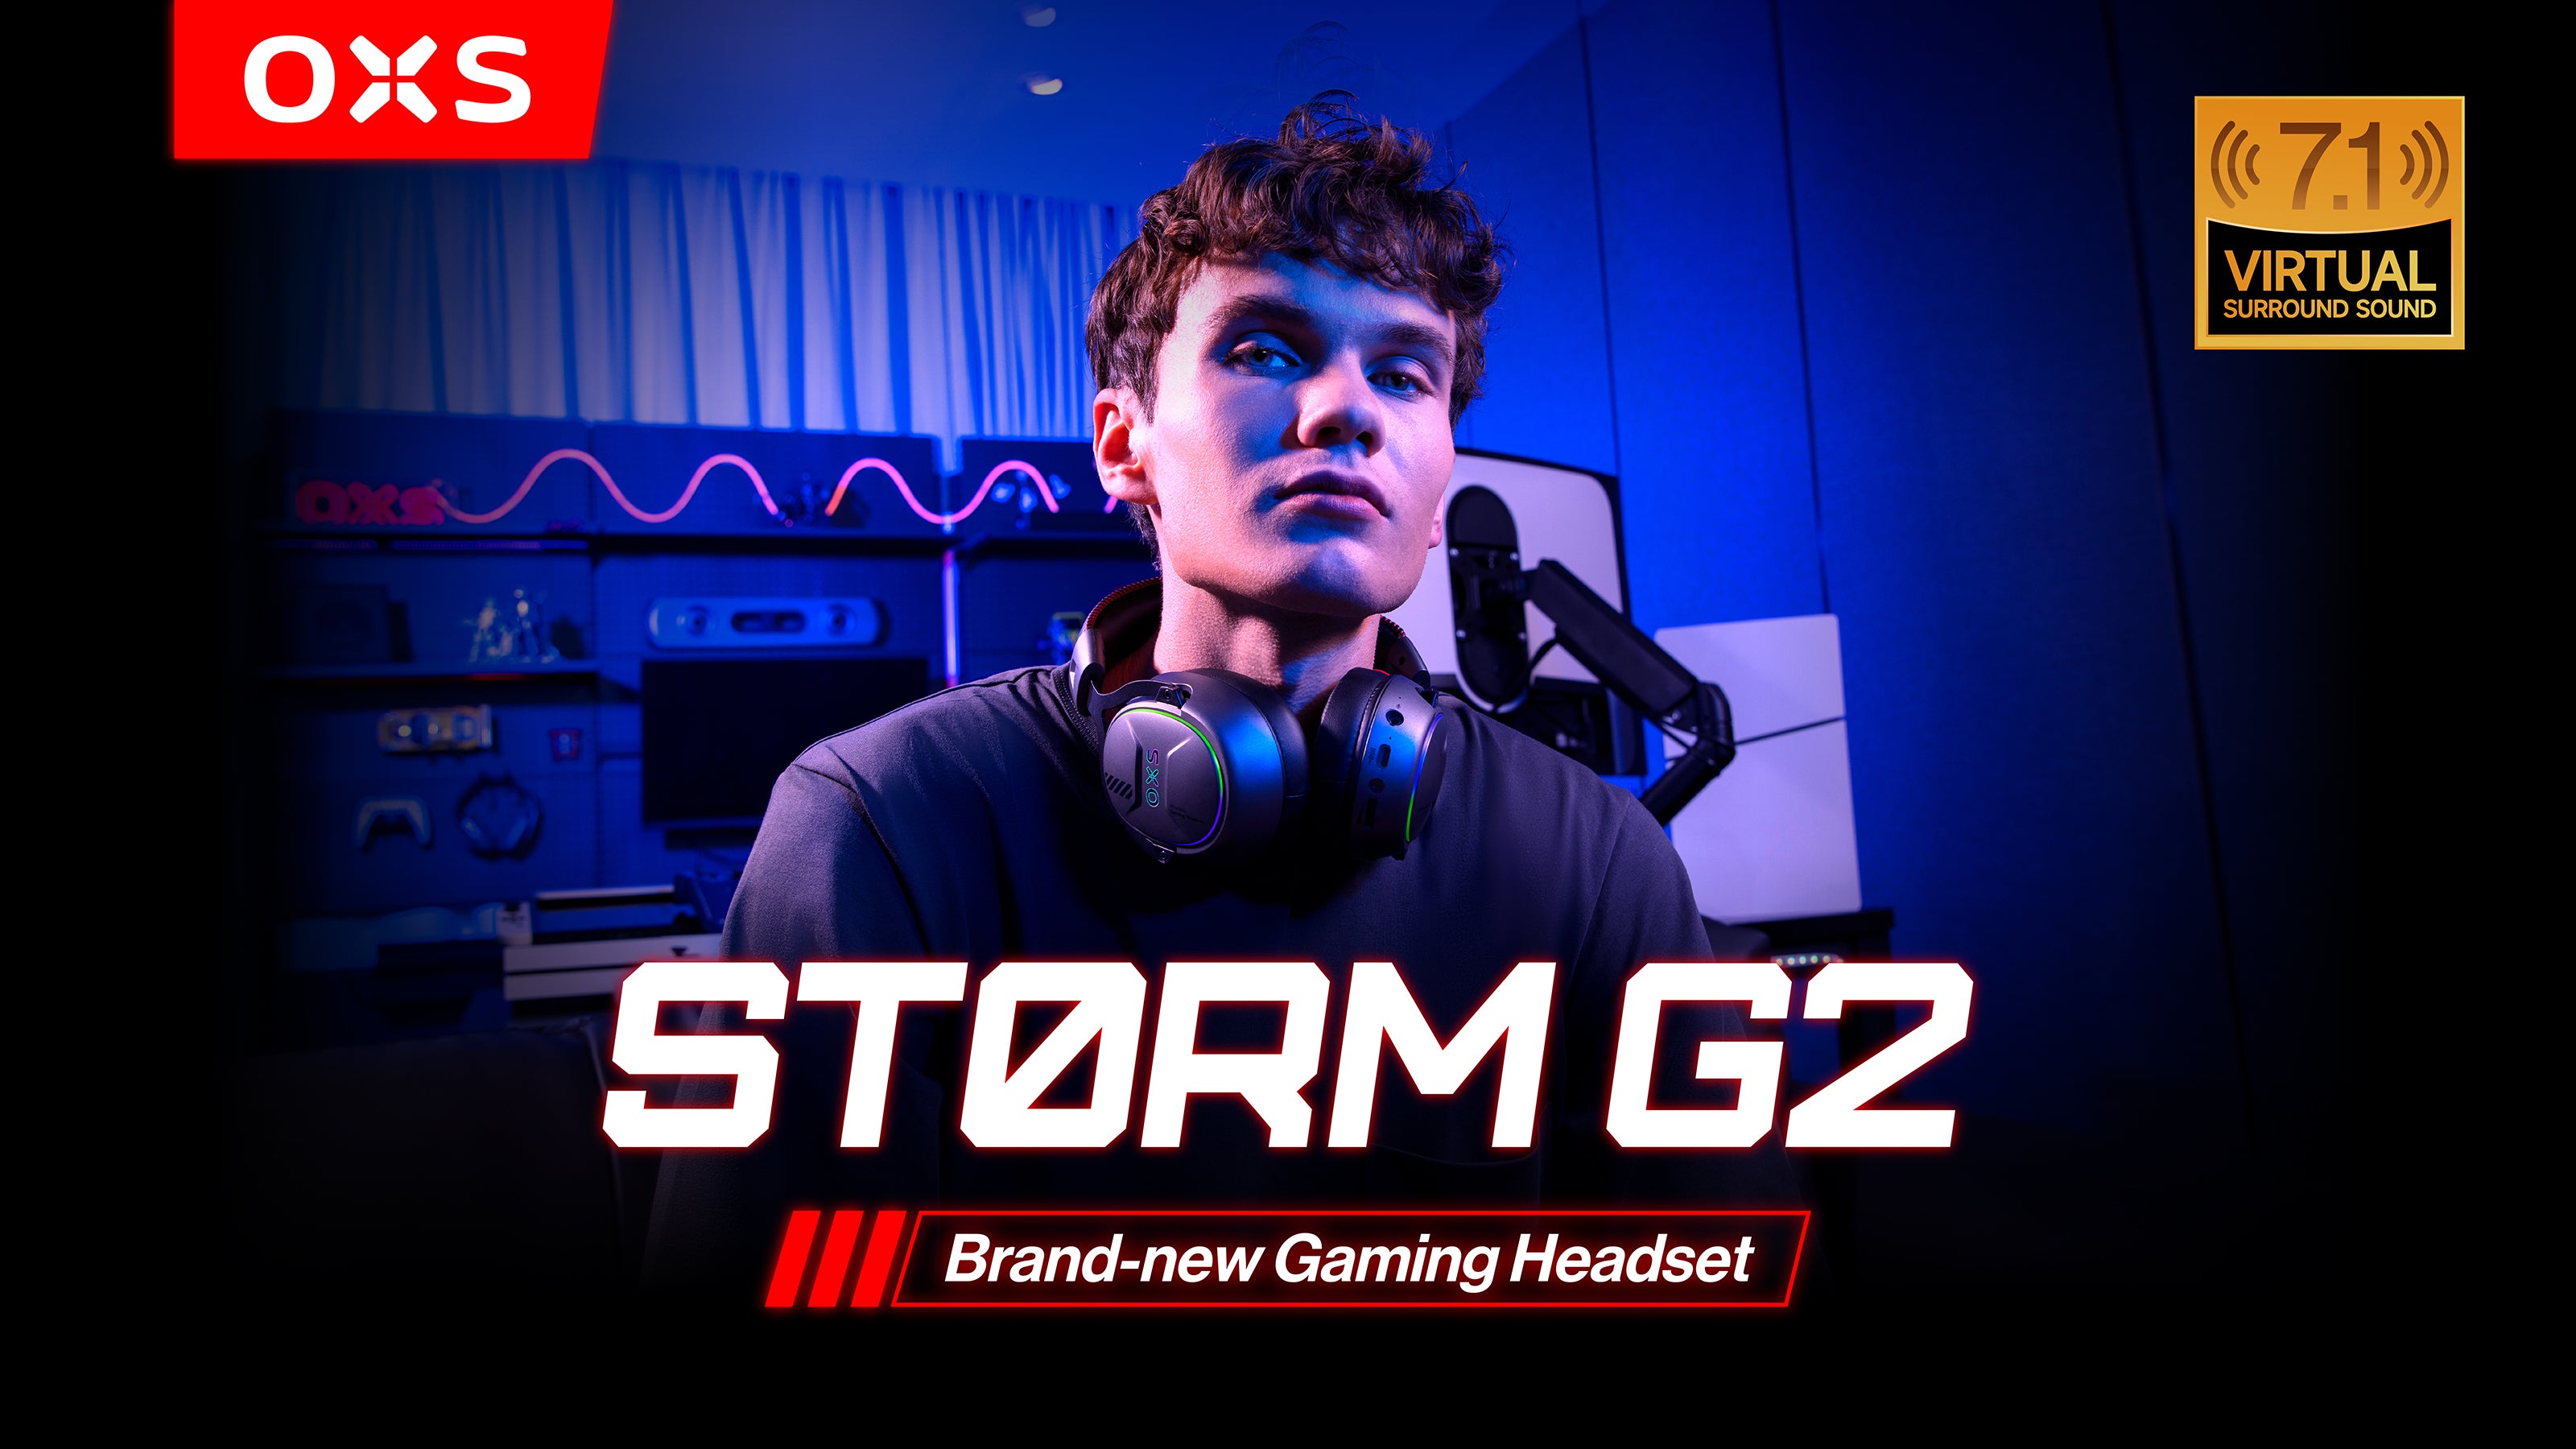 Simple Setup, Powerful Sound: Introducing OXS Storm G2 Gaming Headset